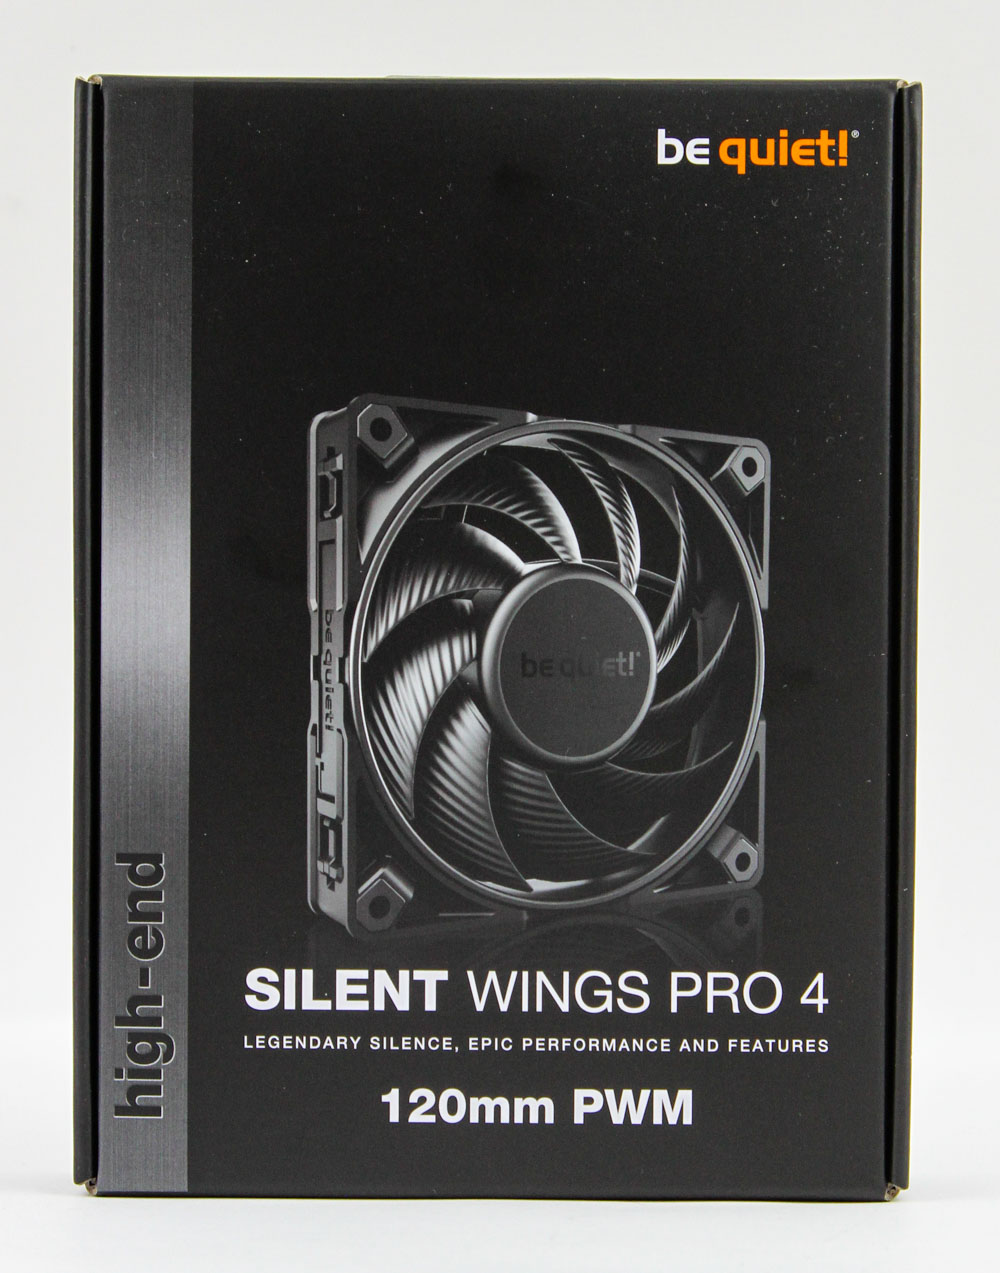 be quiet! Silent & Wings - mm Accessories PWM 120 TechPowerUp Review Packaging Pro 4 Fan 